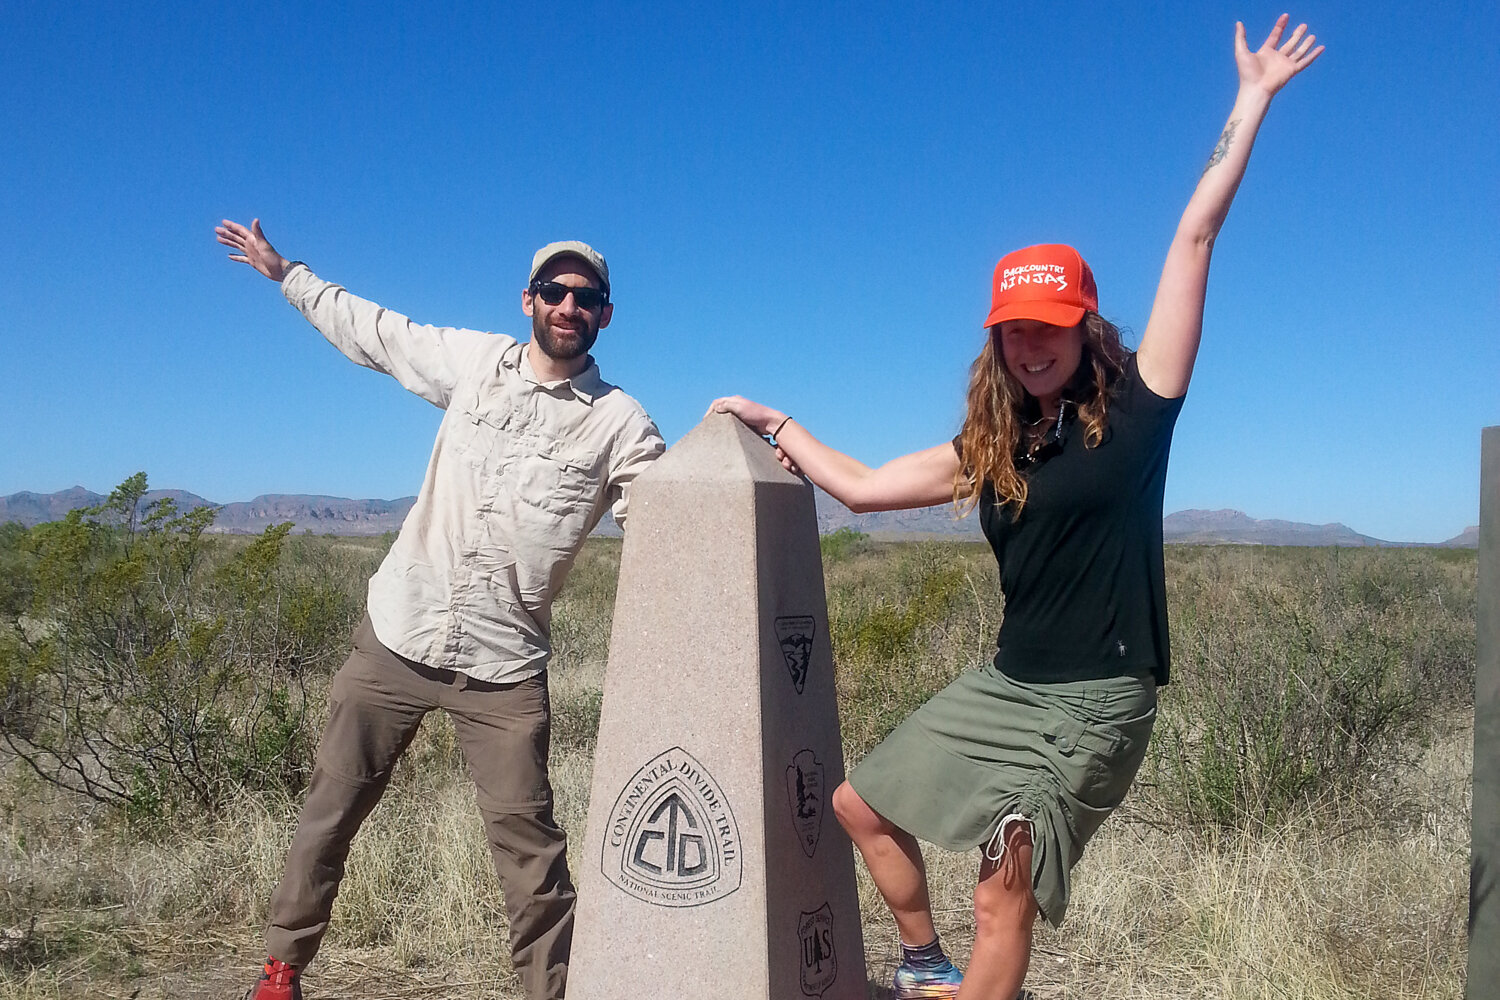 posing for a photo at the CDT's Southern Terminus Monument